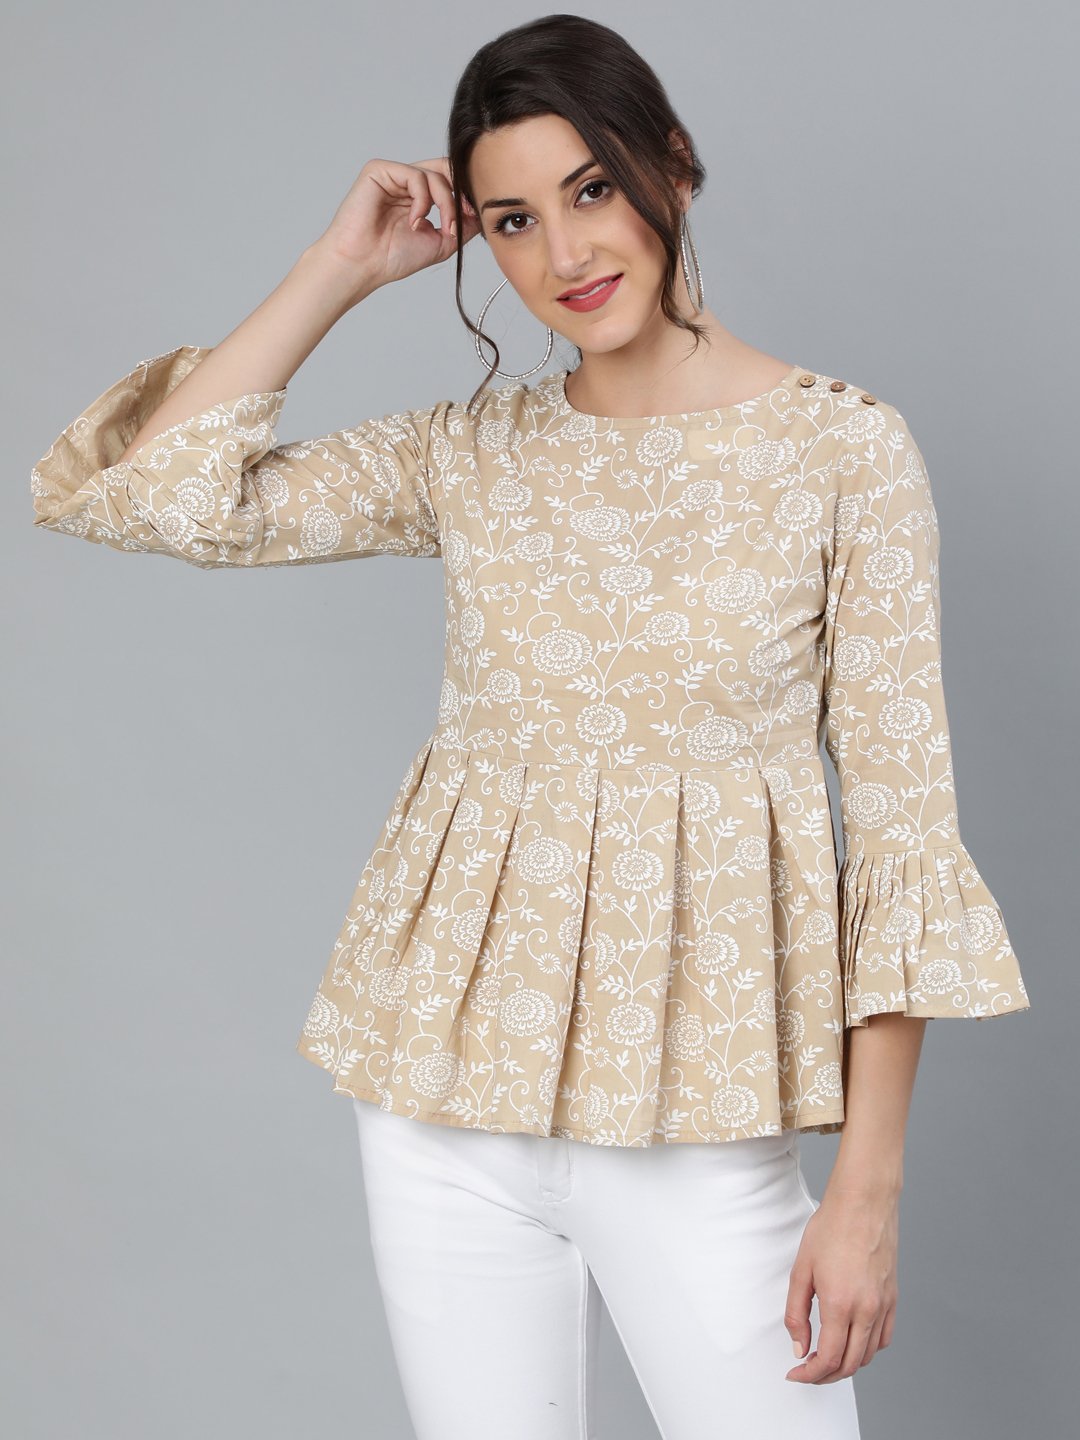 Women's Womenbeige & Off-White Floral Printed Top With Round Neck & Three Quarter Sleeves - Nayo Clothing